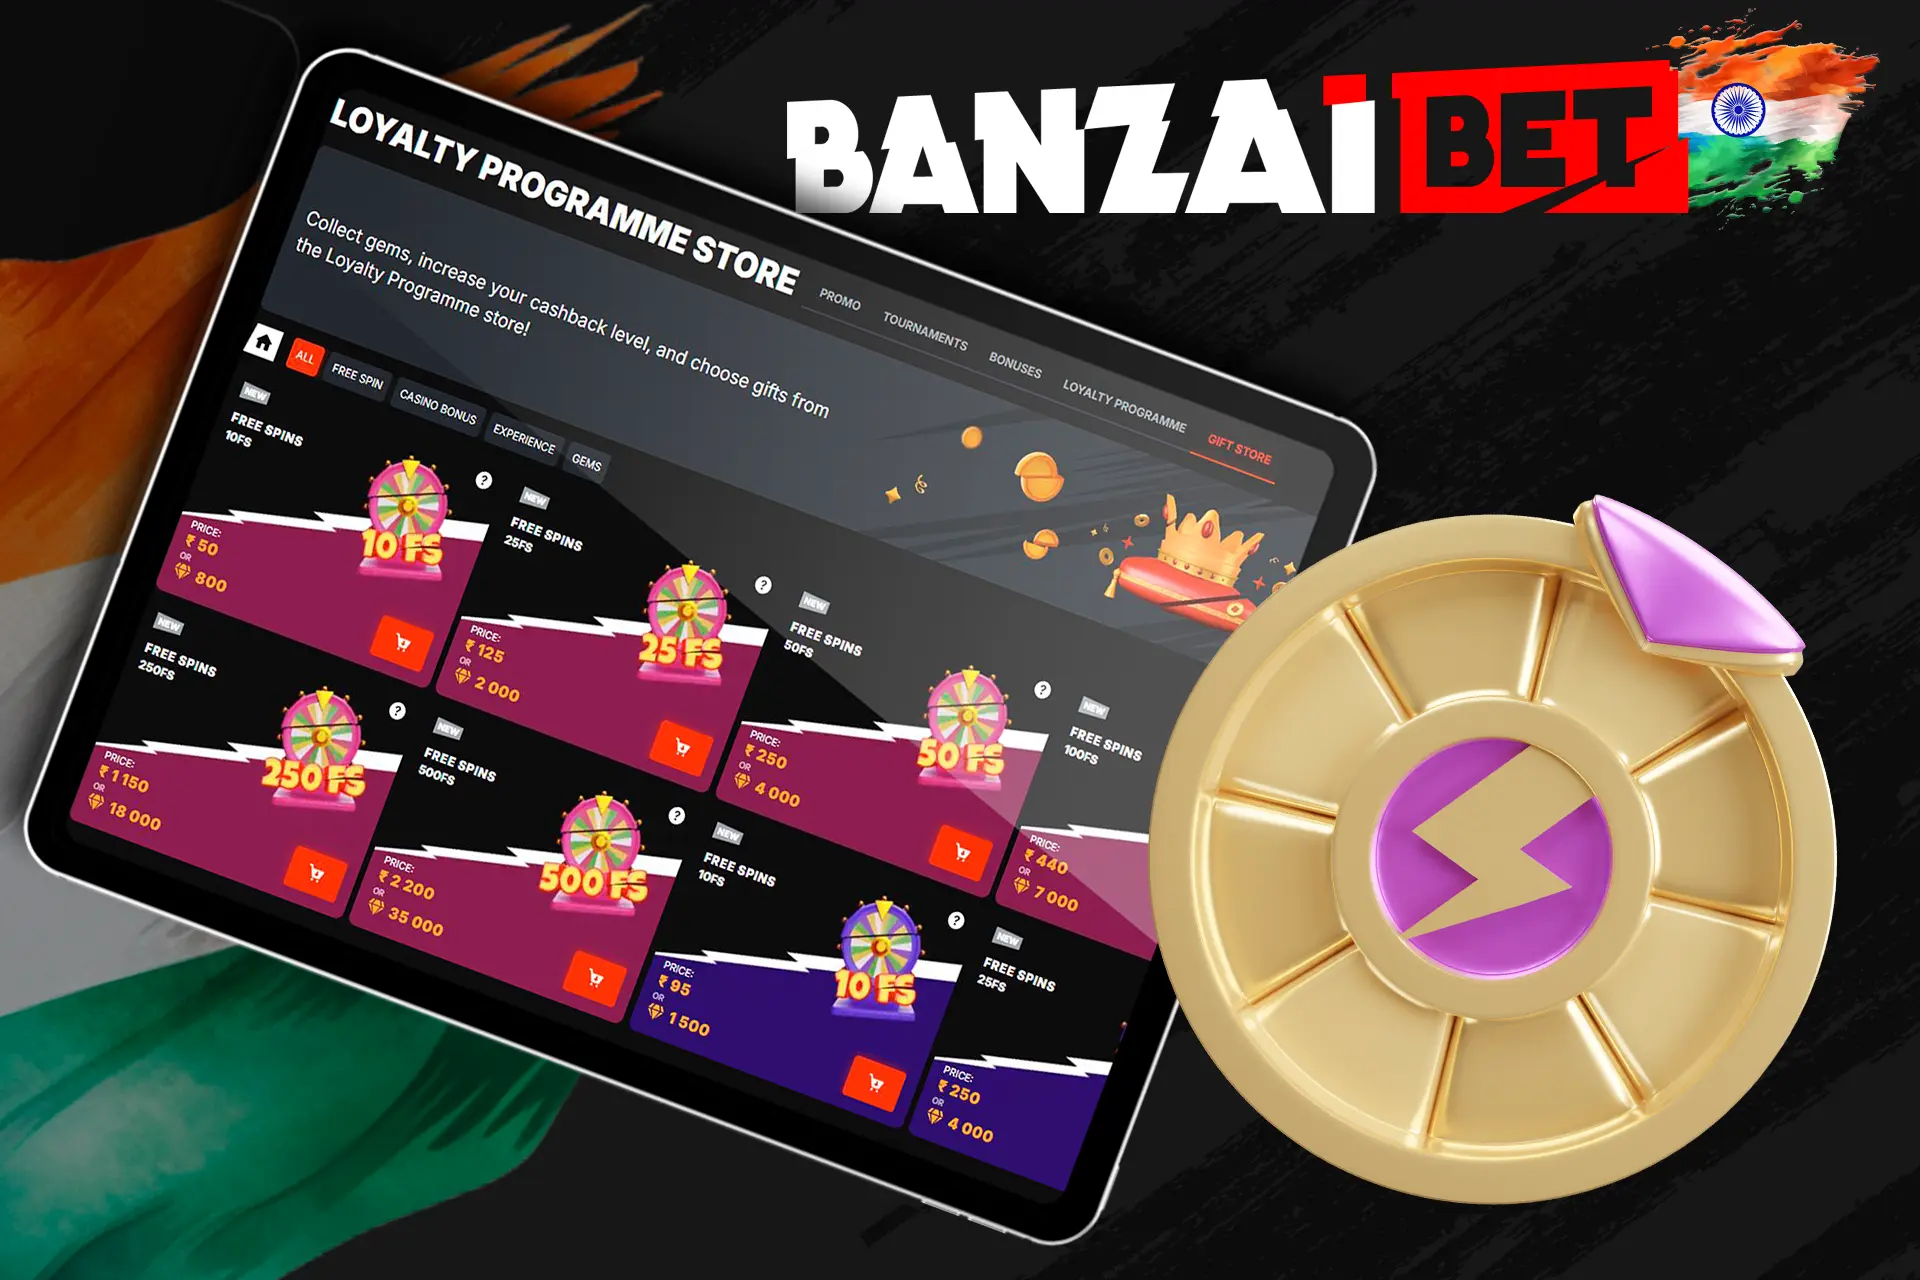 Lots of bonus offers on the Gift Store at Banzaibet India